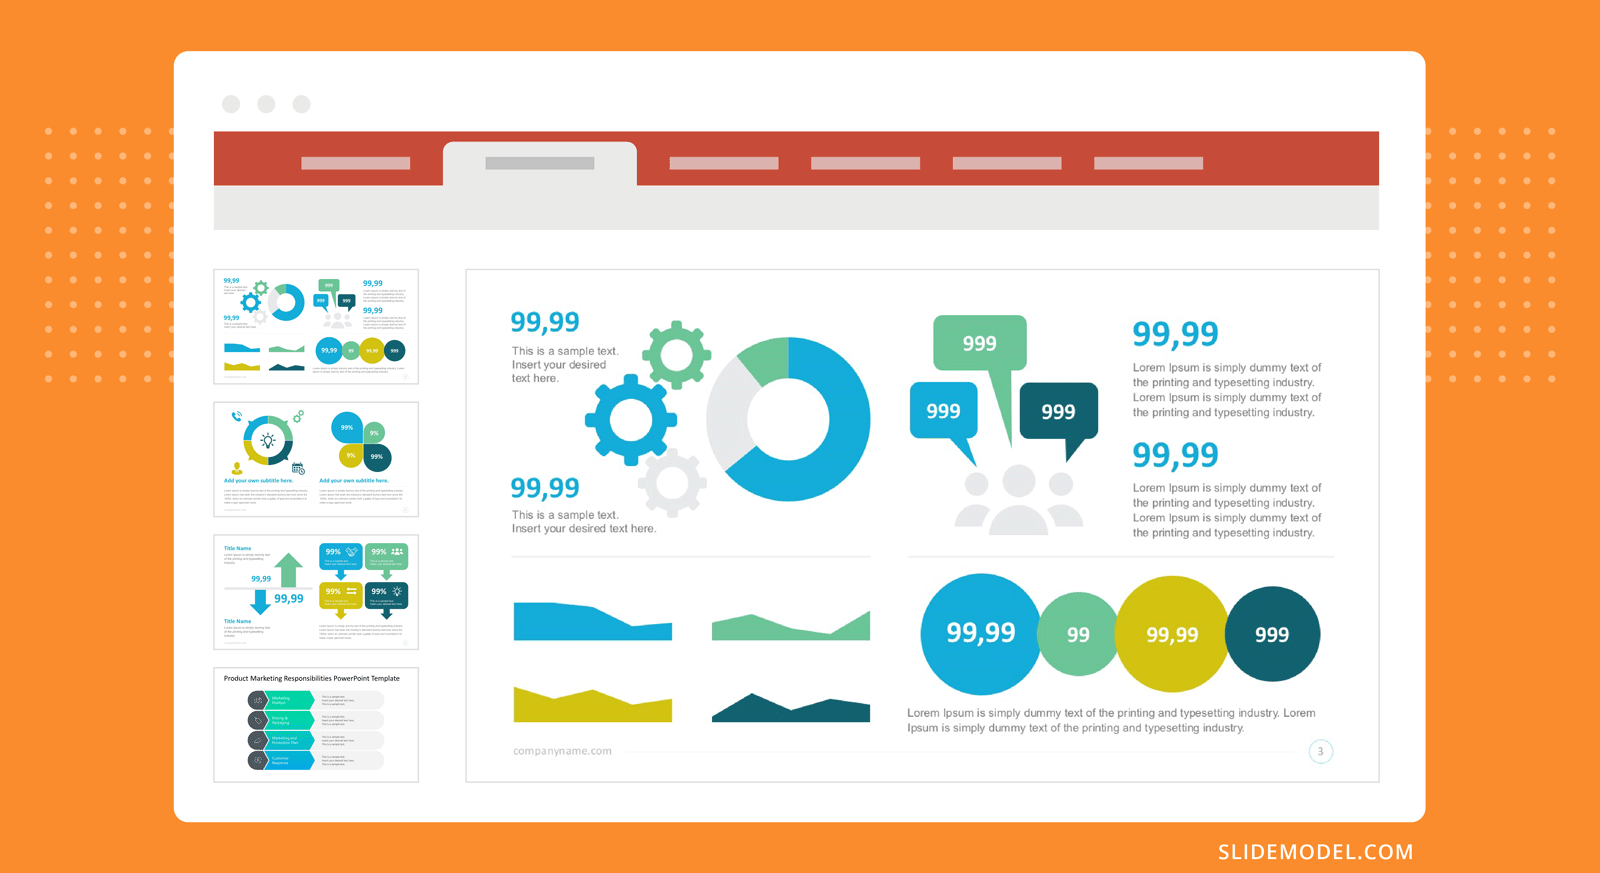 Example of infographic presentation template design with visual elements.